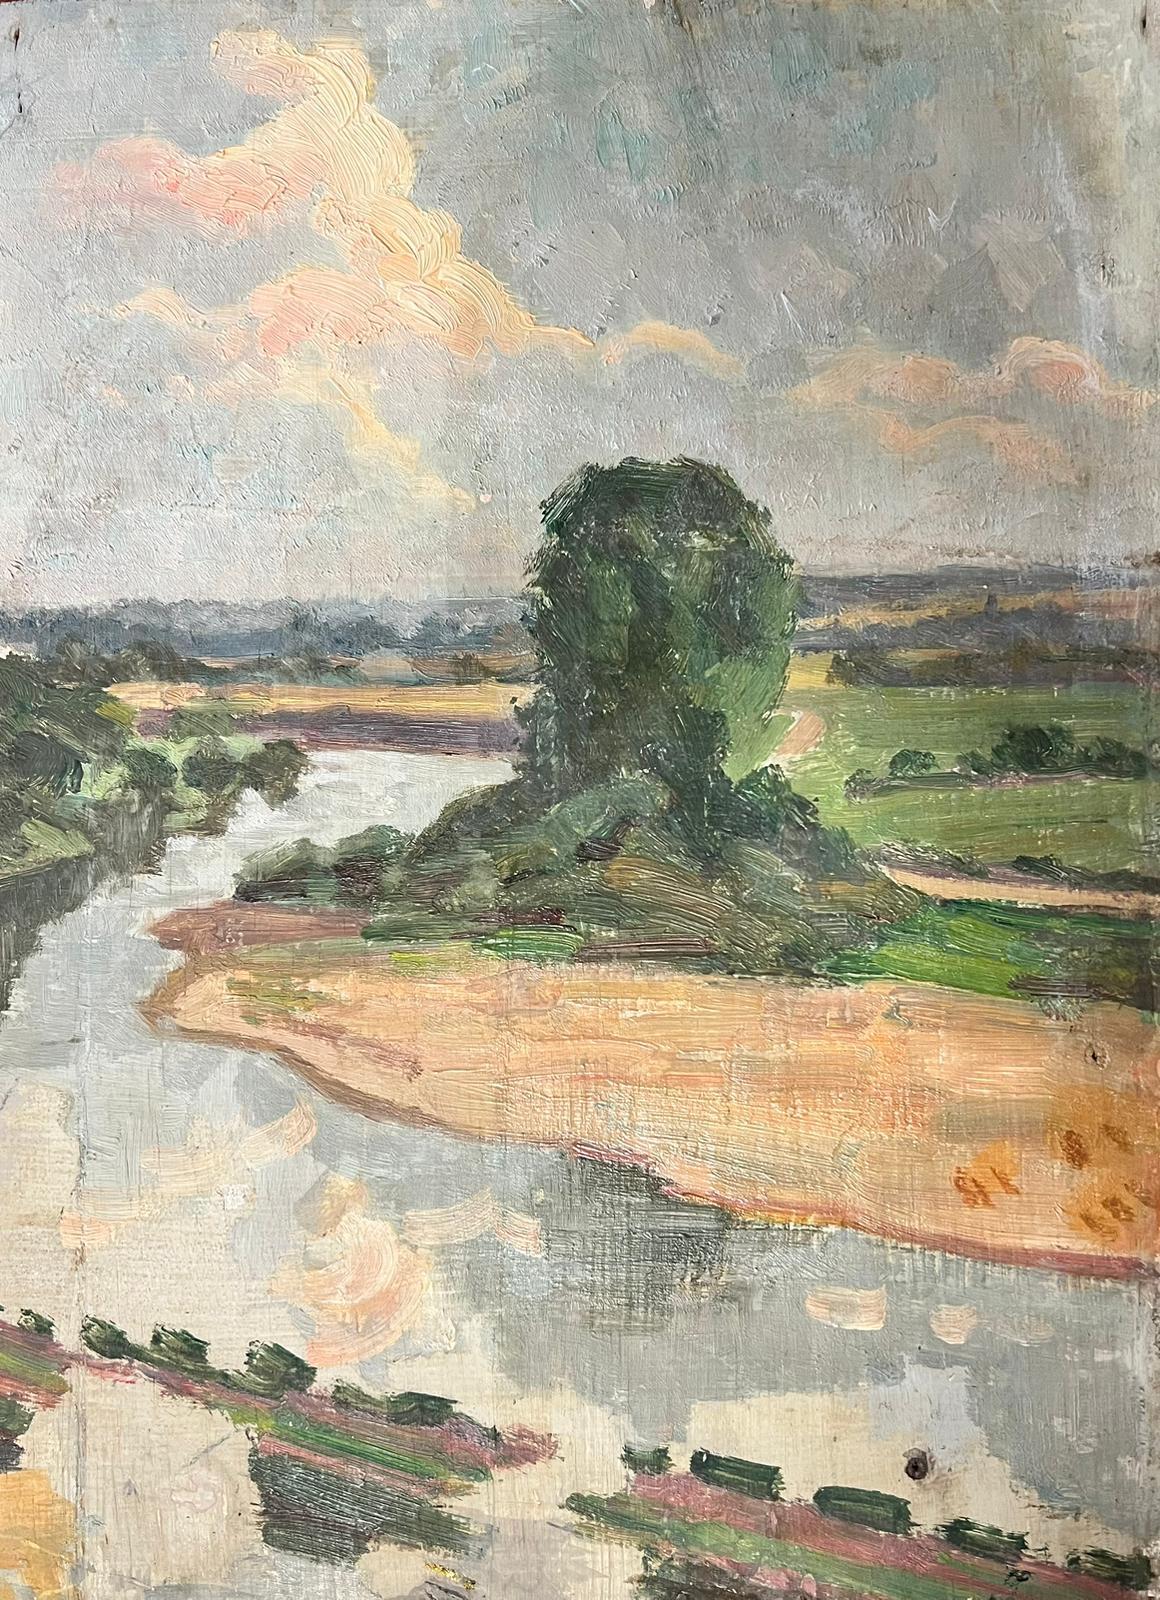 Suzanne Crochet Landscape Painting - 1930's French Post Impressionist Oil Painting Winding River Landscape Sketch